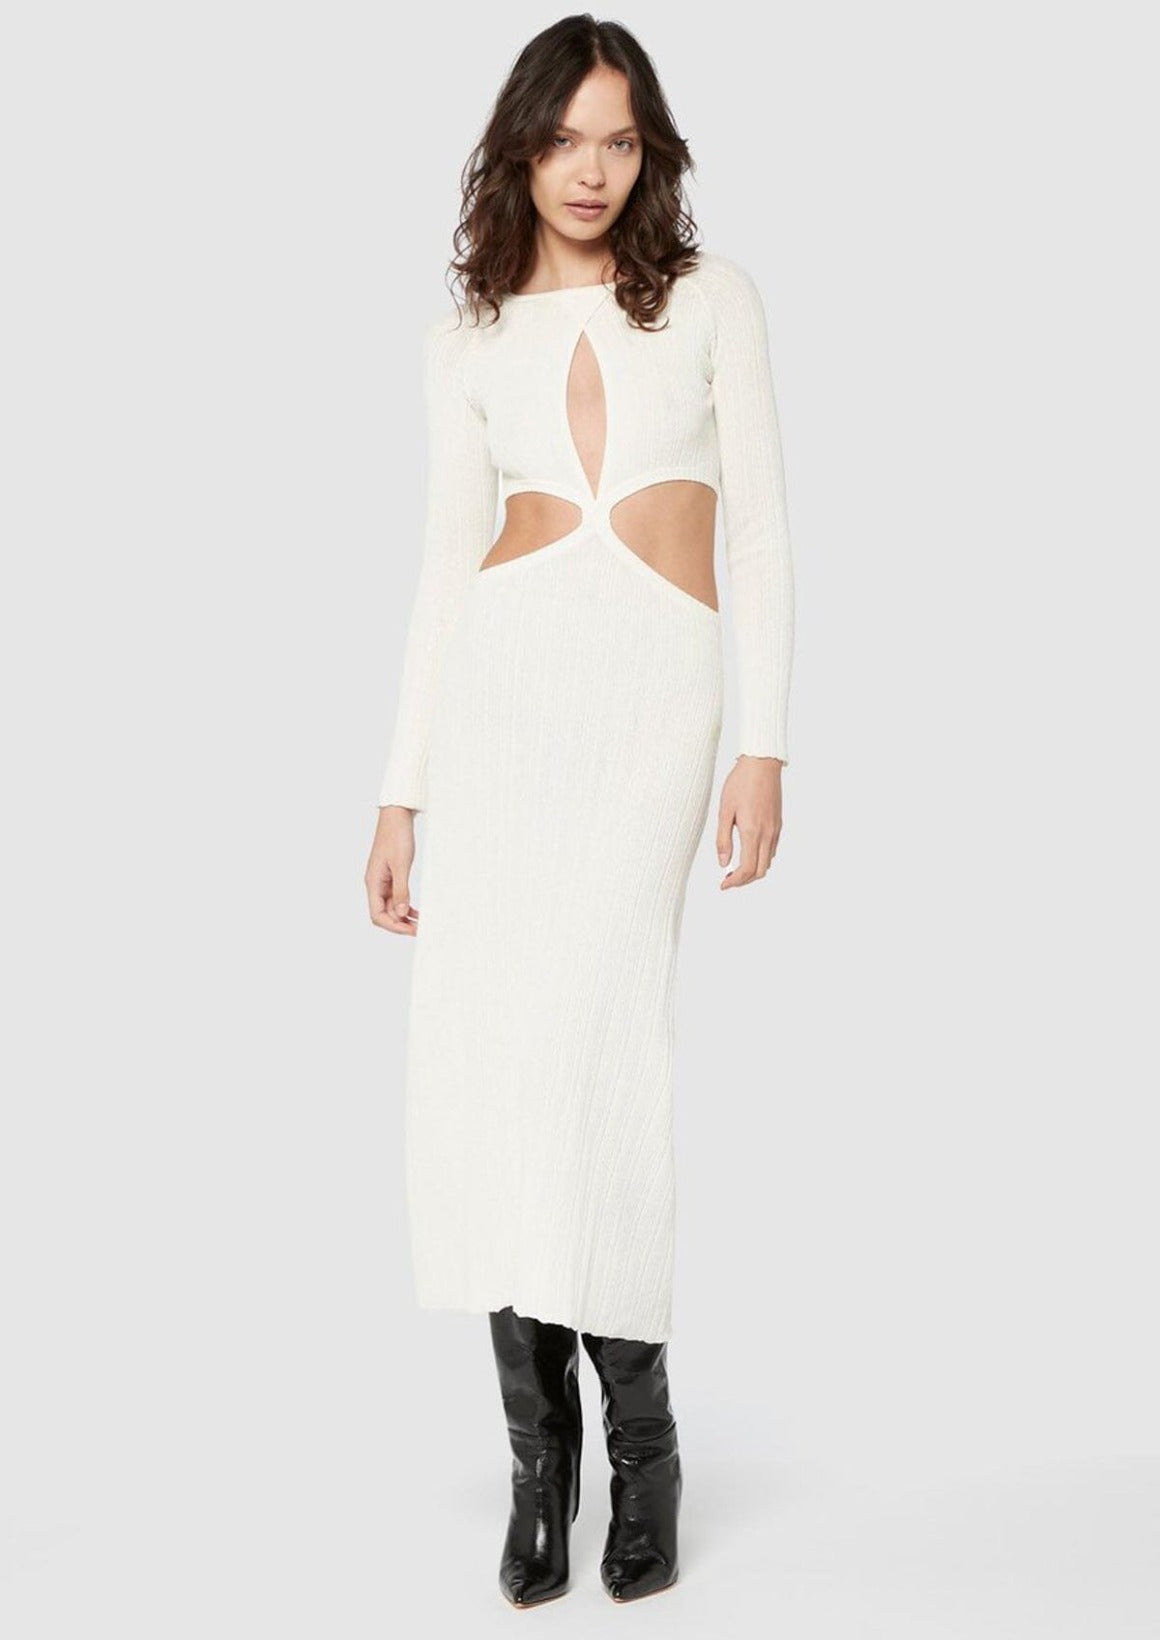 New Dimensions Cut Out Knit Dress - White Clothing Manning Cartell 